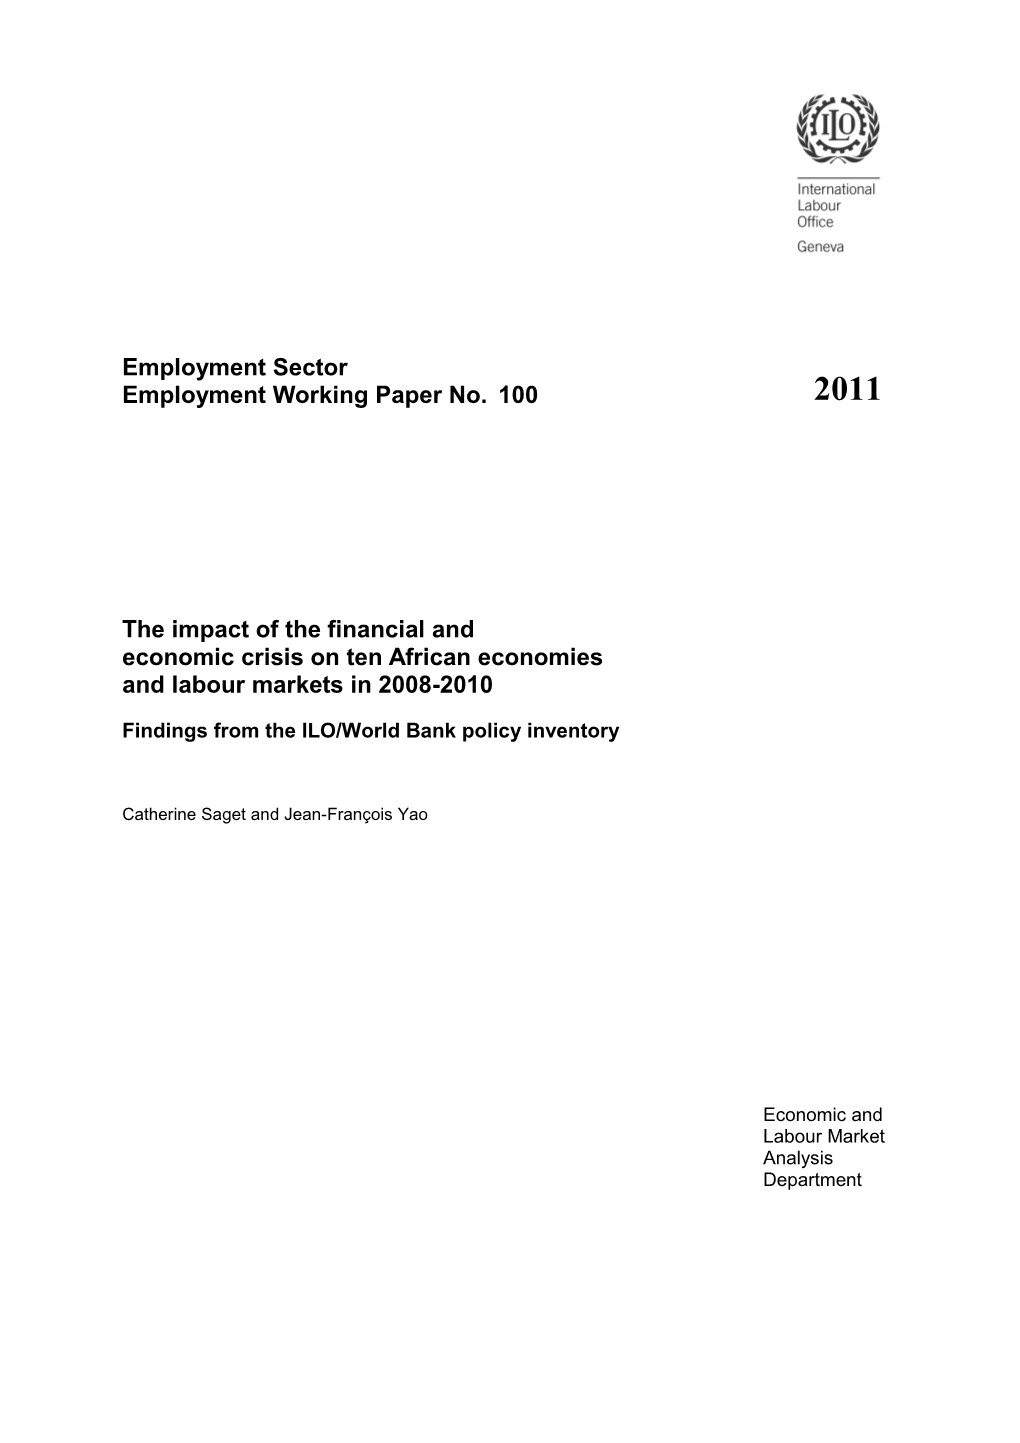 Employment Sector Employment Working Paper No